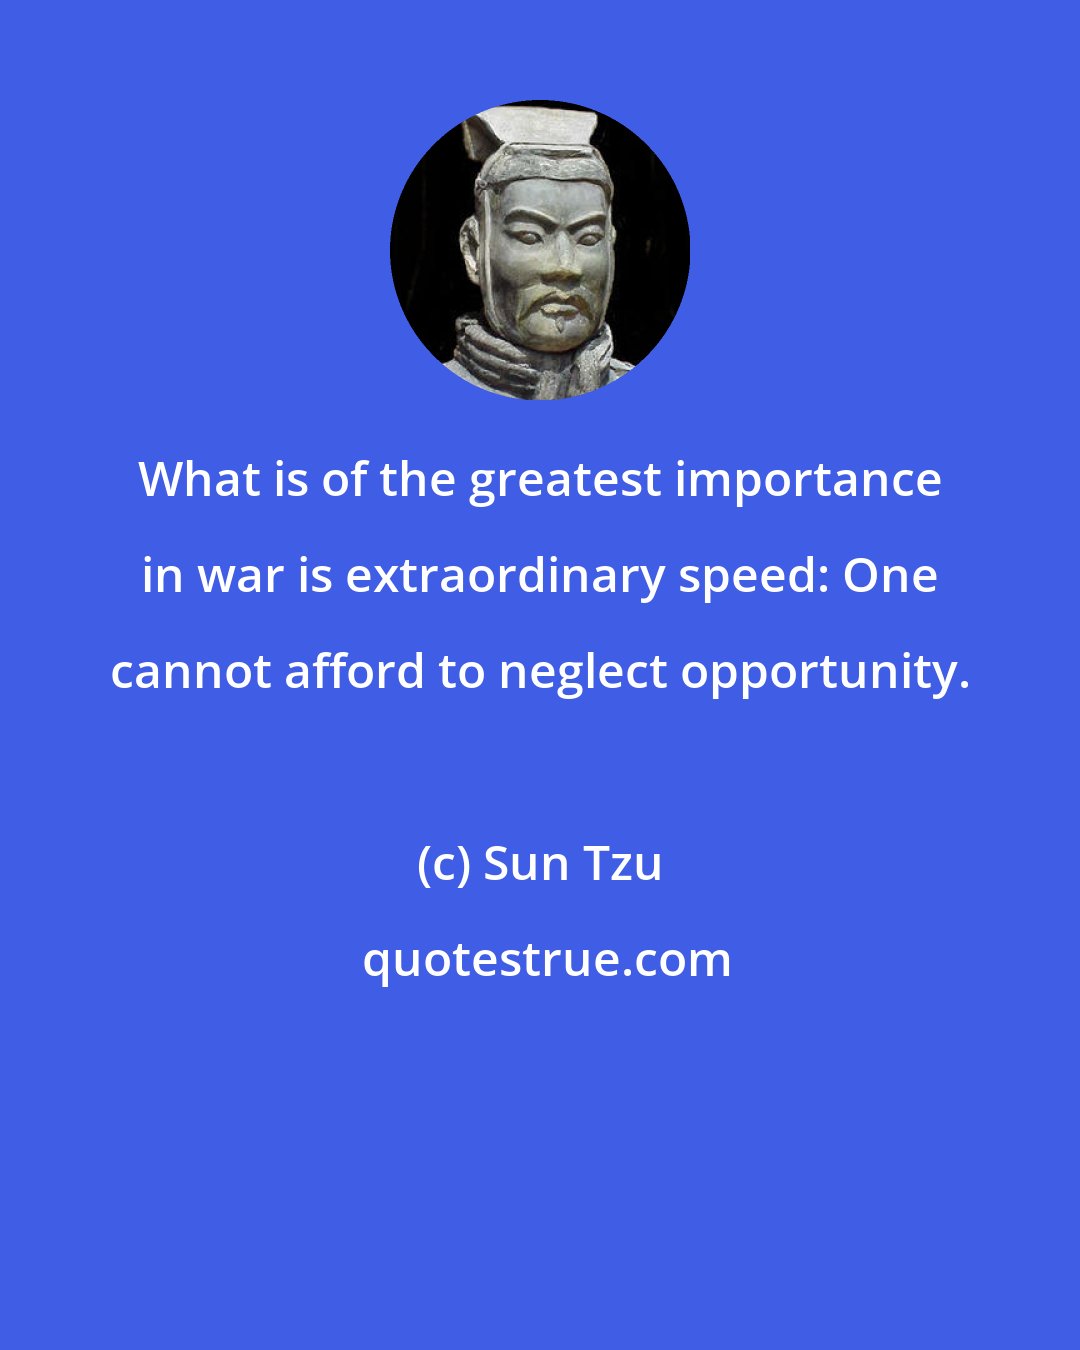 Sun Tzu: What is of the greatest importance in war is extraordinary speed: One cannot afford to neglect opportunity.